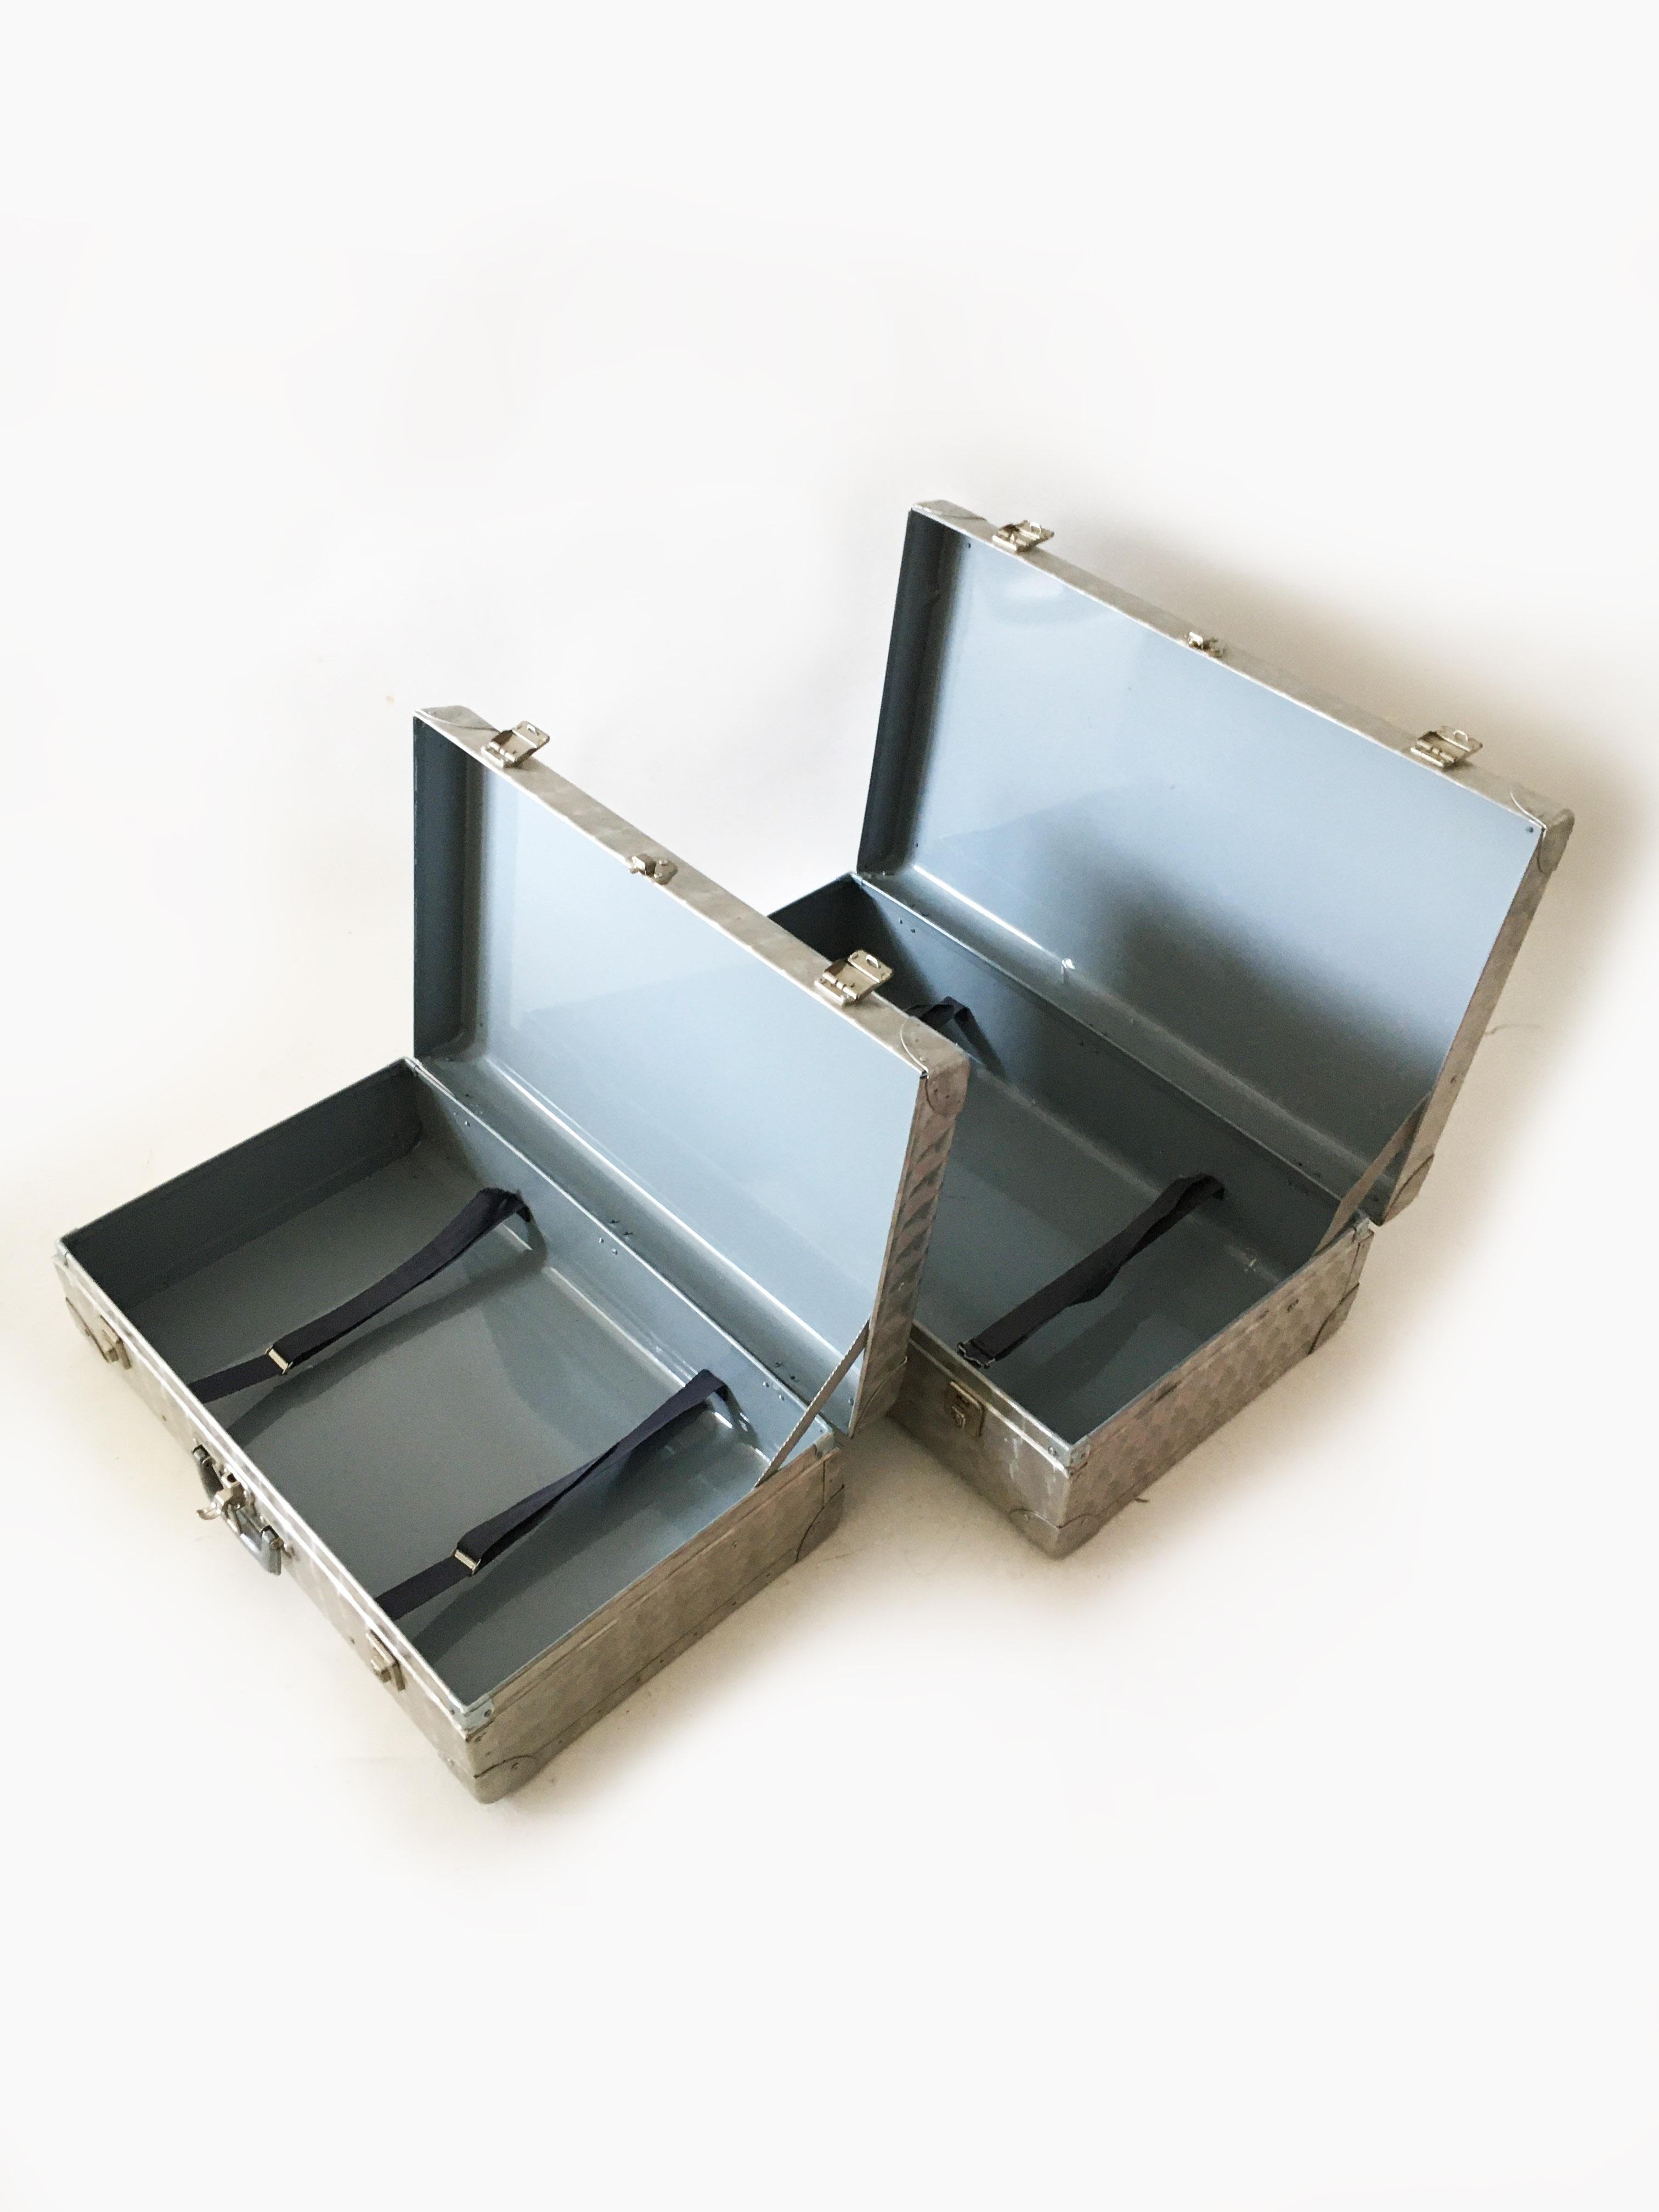 Cheney, London Aluminum Suitcase Luggage, Set of Two, England, 1960s For Sale 2